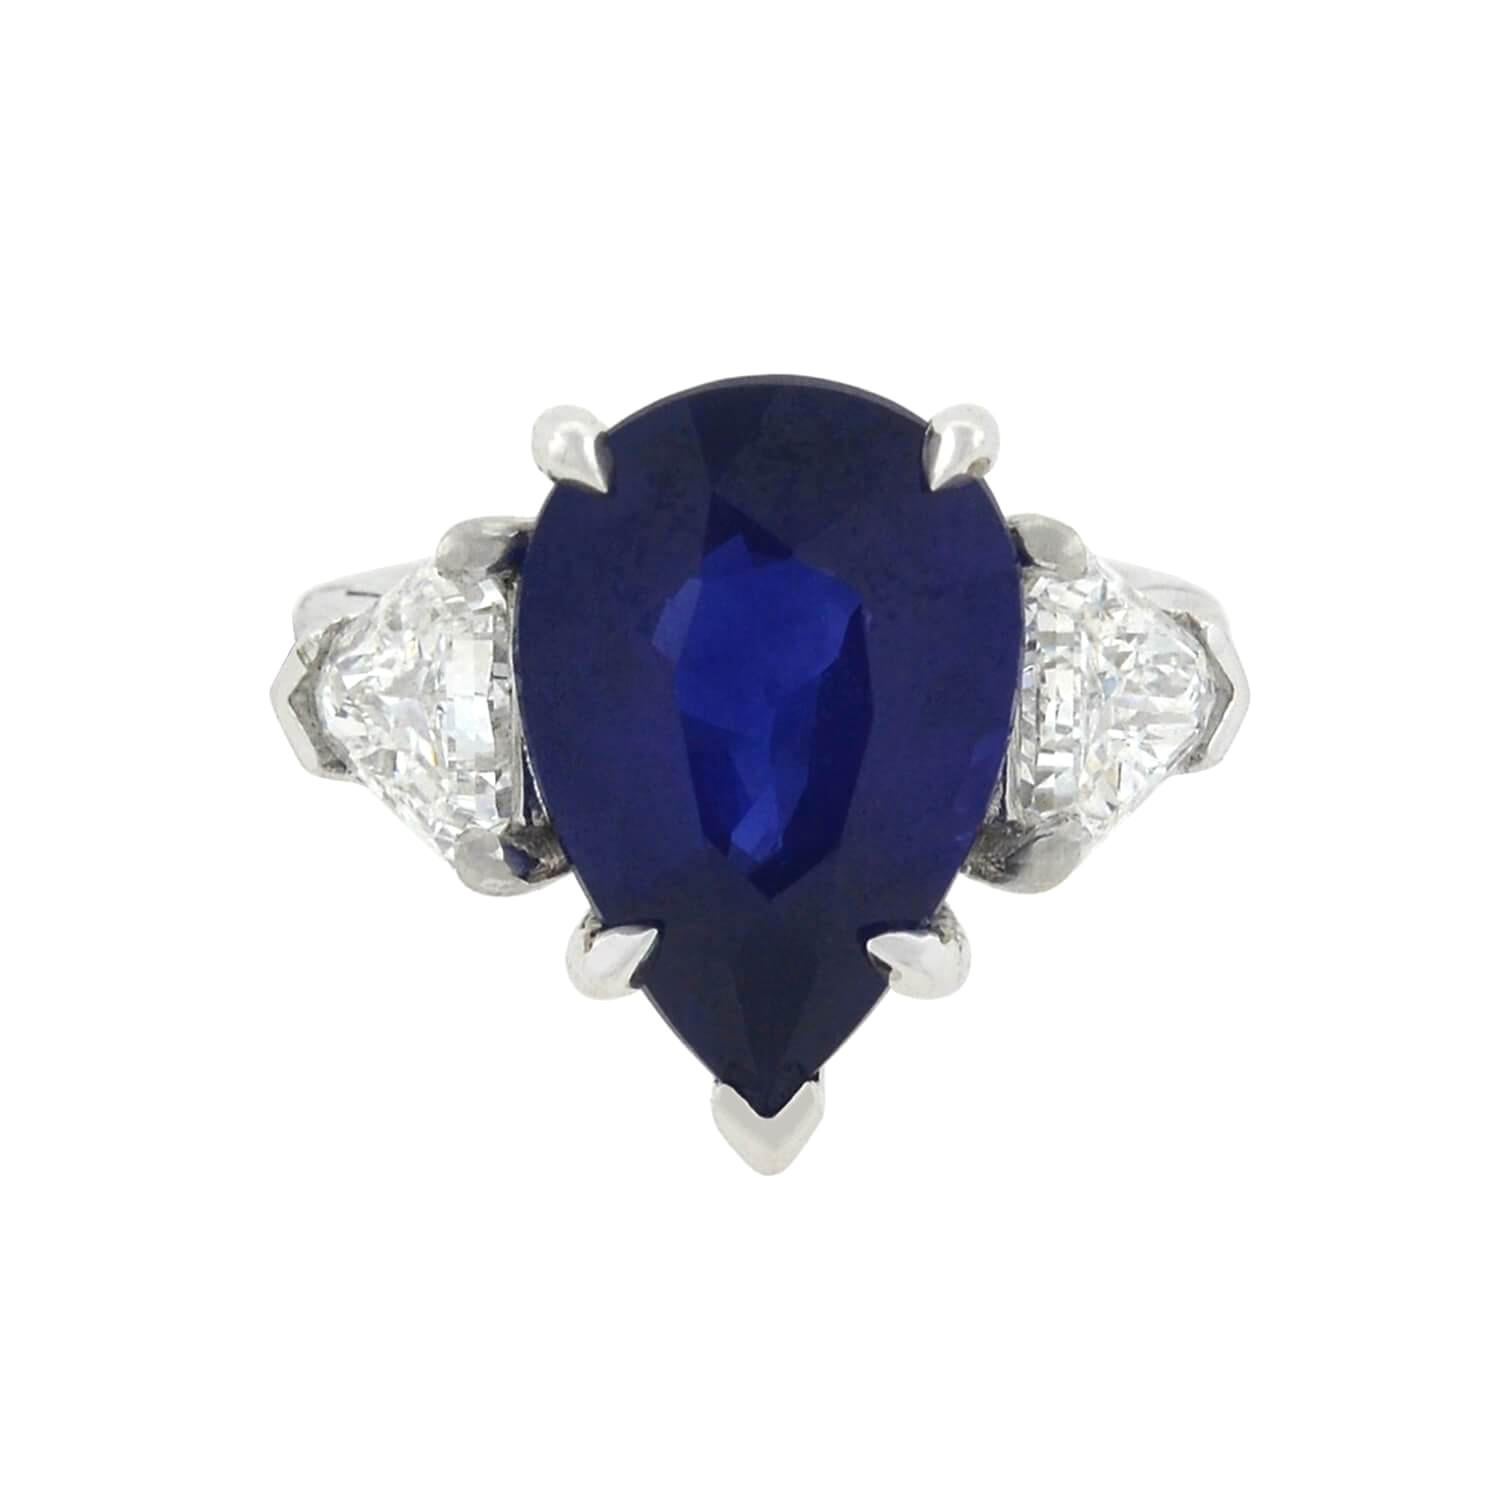 Contemporary Natural 6.05 Carat Pear Shaped Sapphire and Diamond Ring